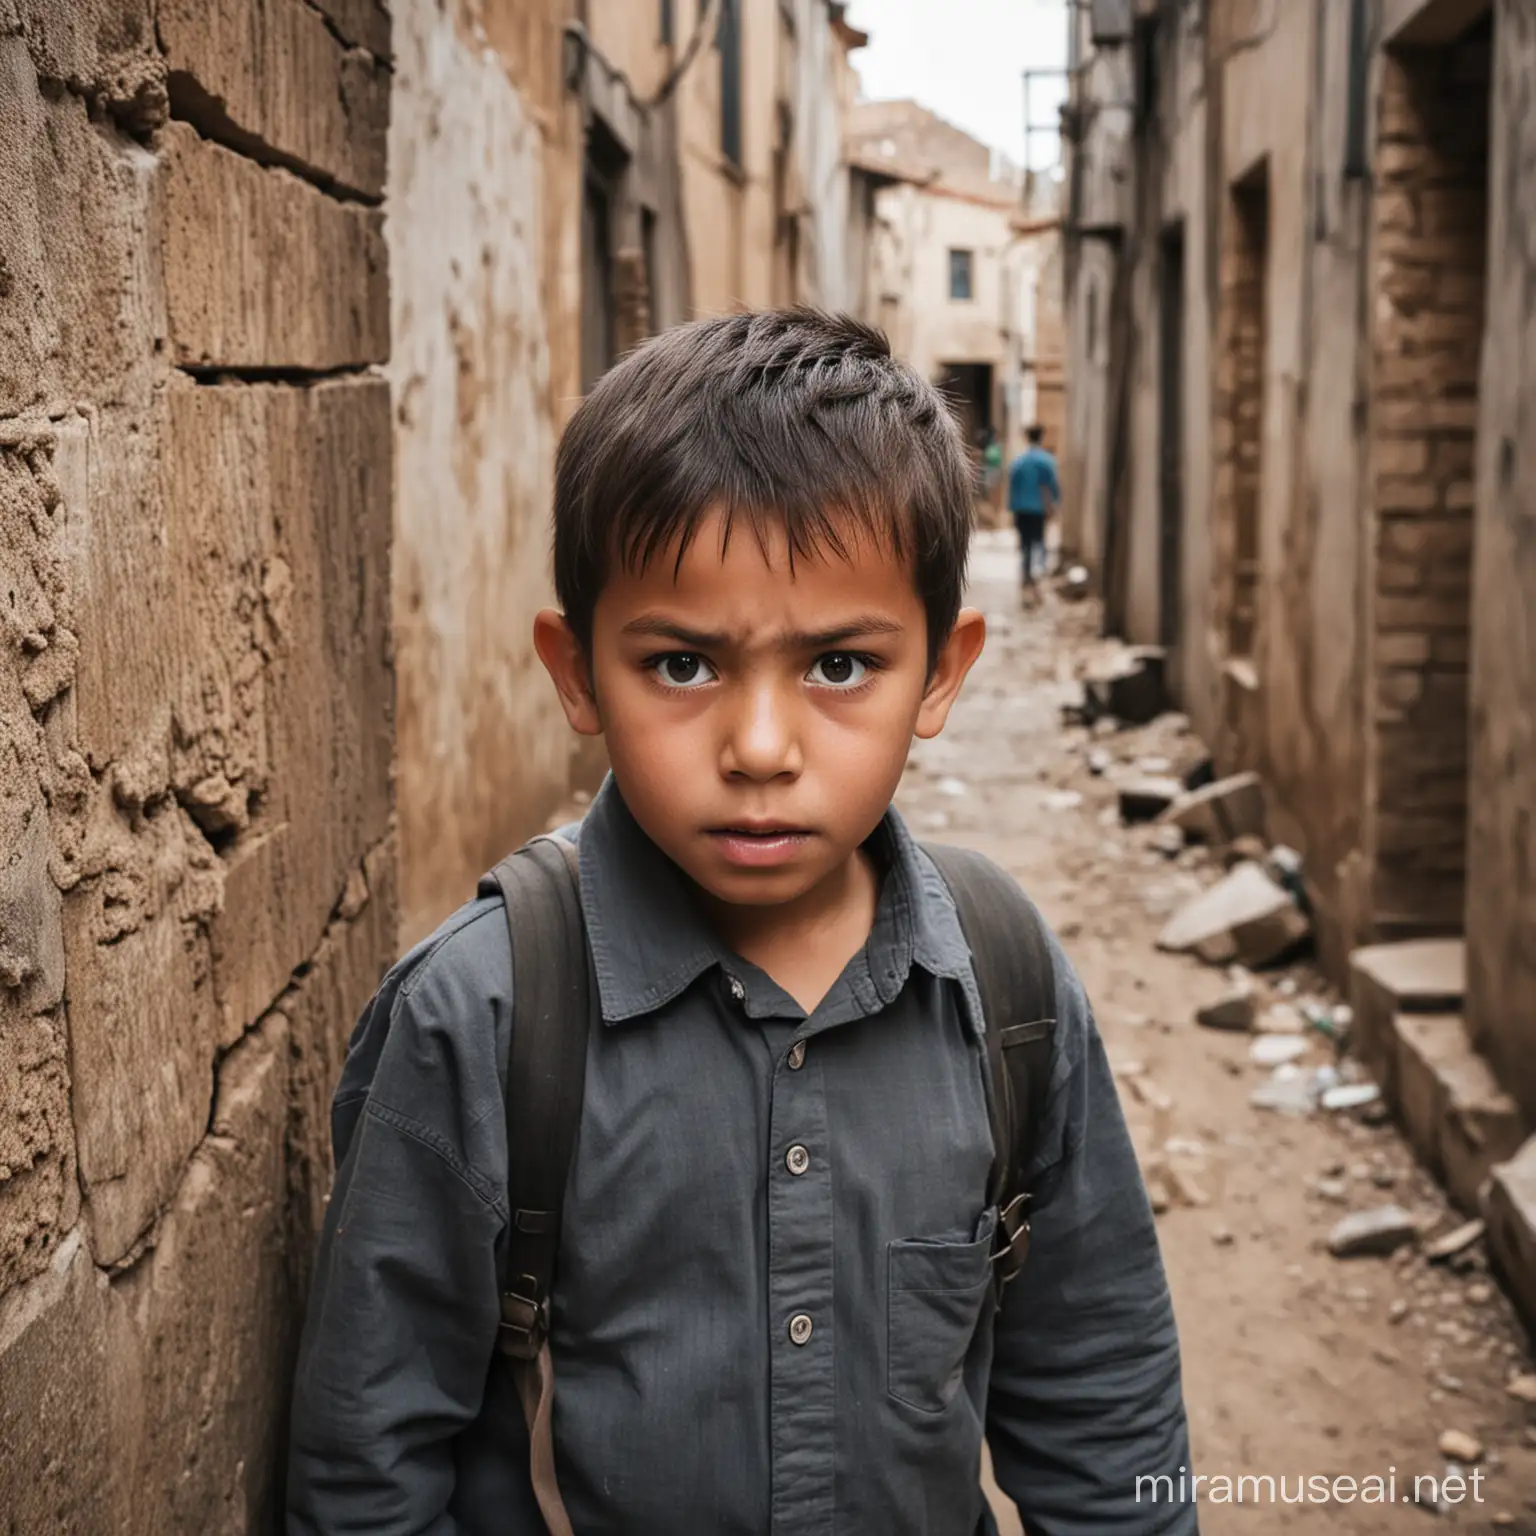 A picture of a child looking at me and behind him children fighting in an old area 